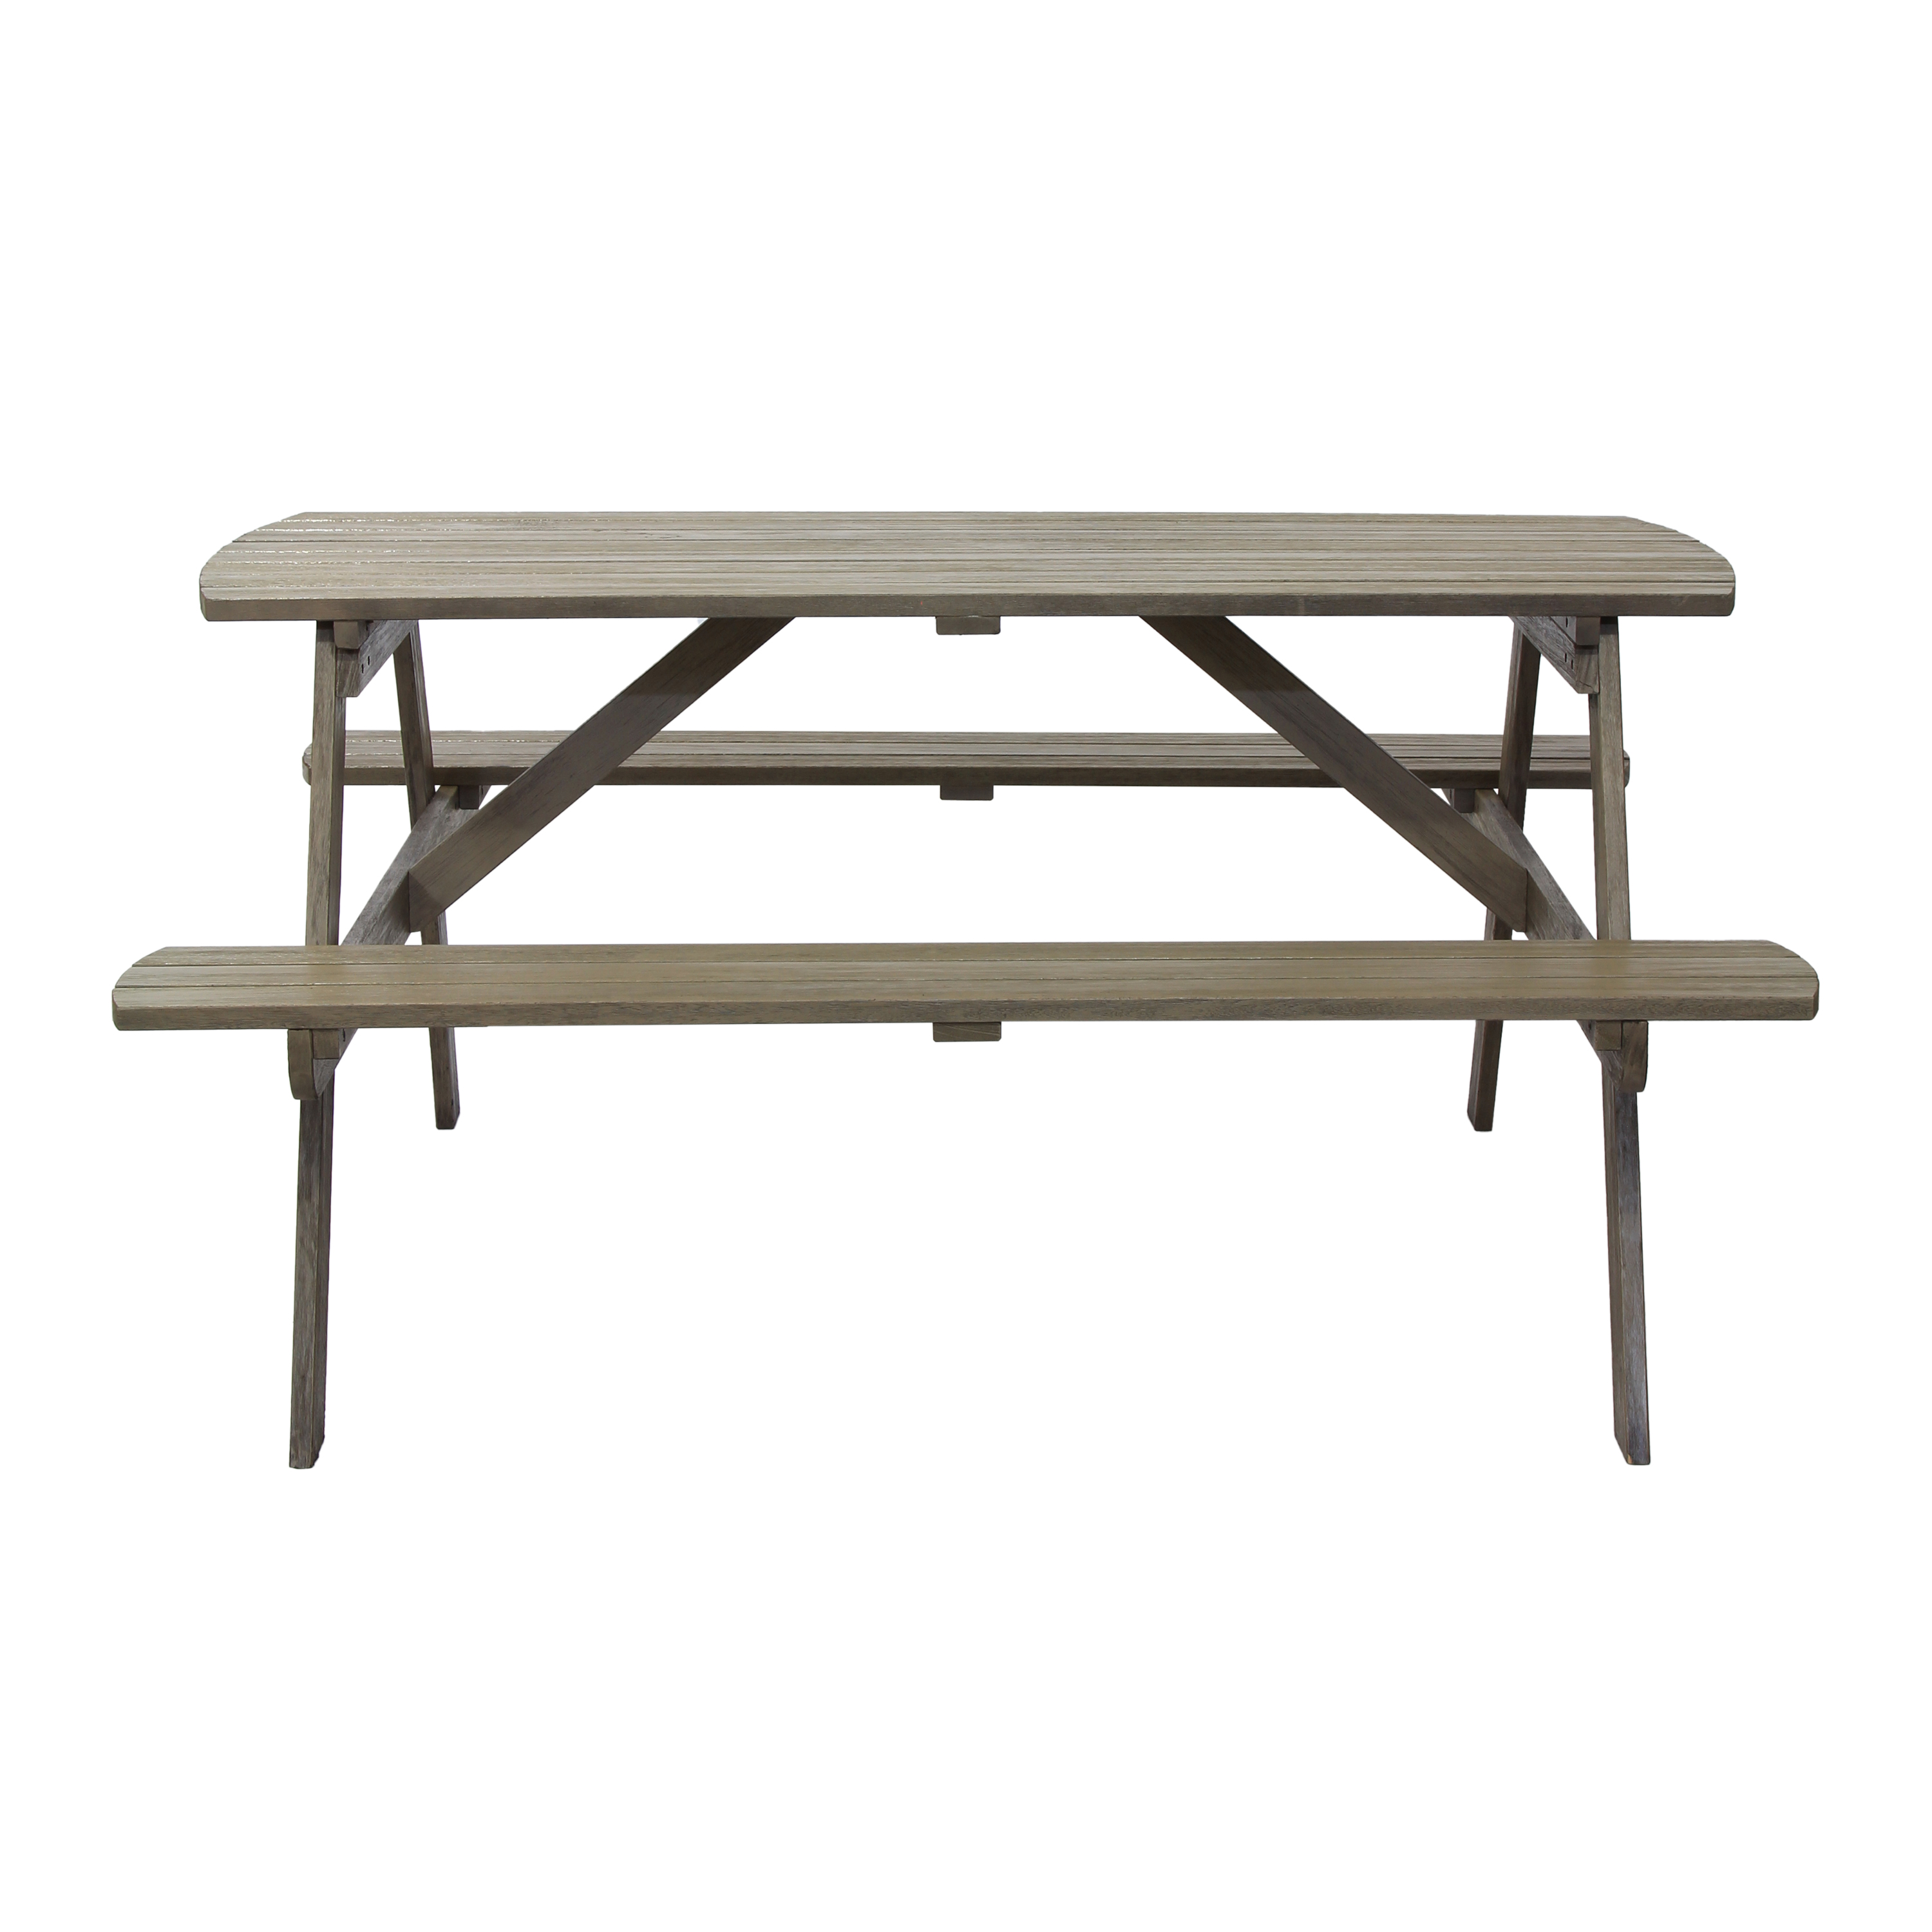 Mainstays Martis Bay Wood Outdoor Picnic Table, Gray - image 5 of 6